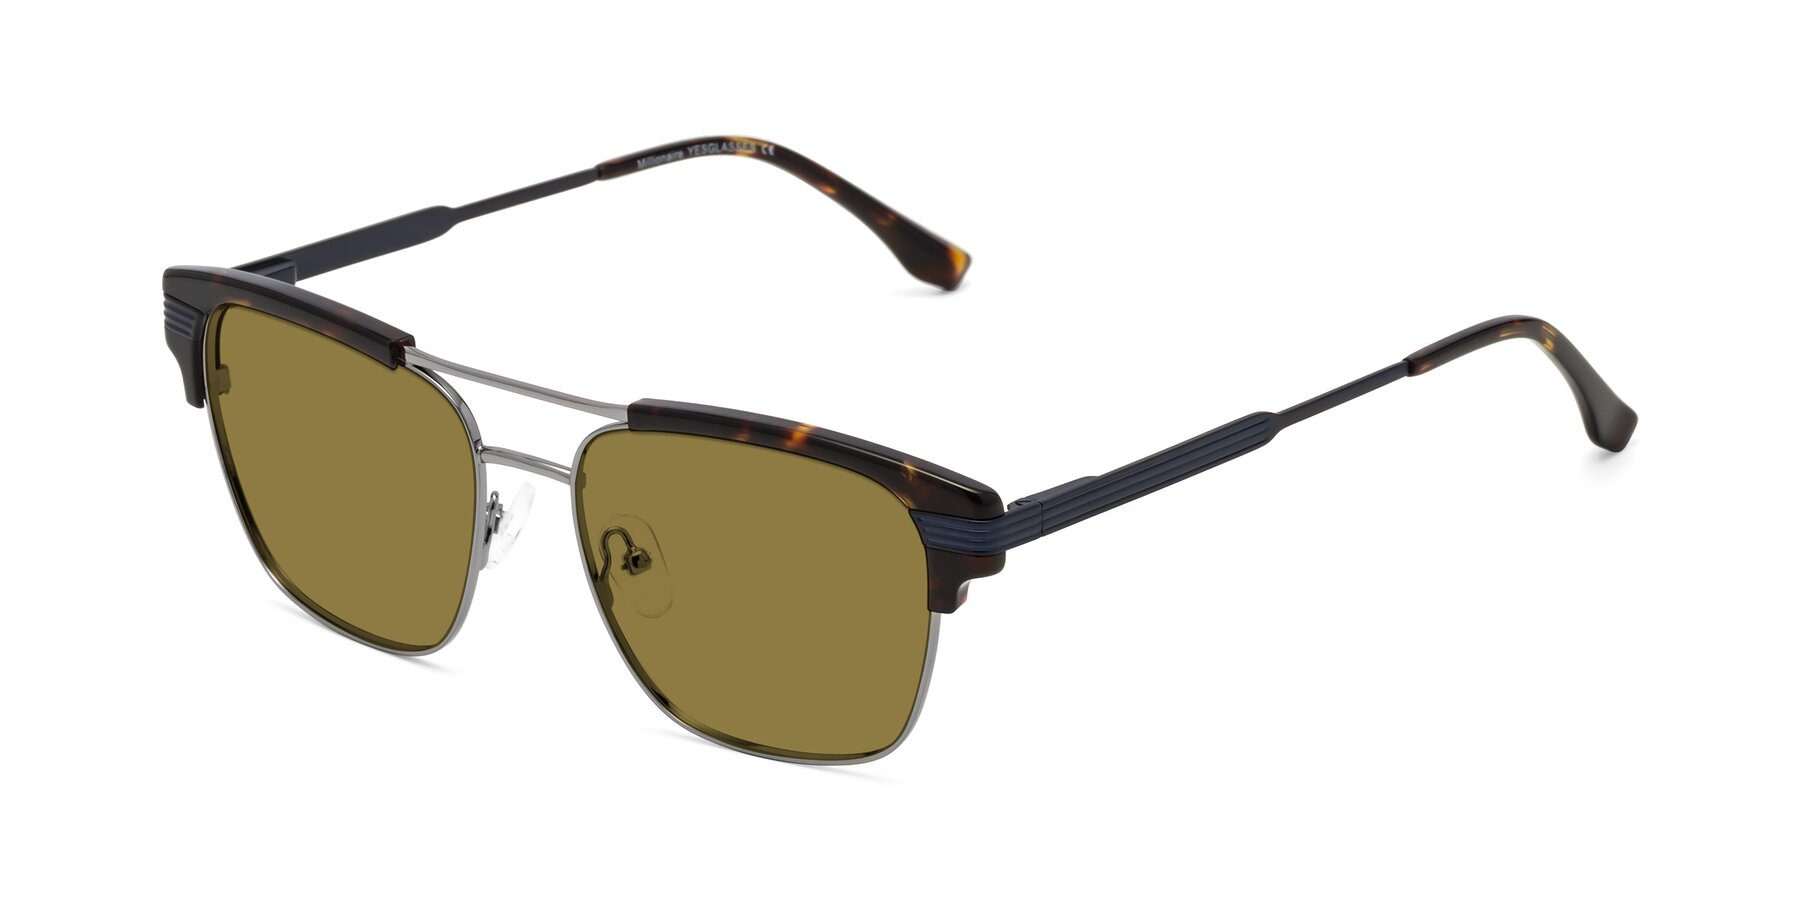 Angle of Millionaire in Tortoise-Gunmetal with Brown Polarized Lenses